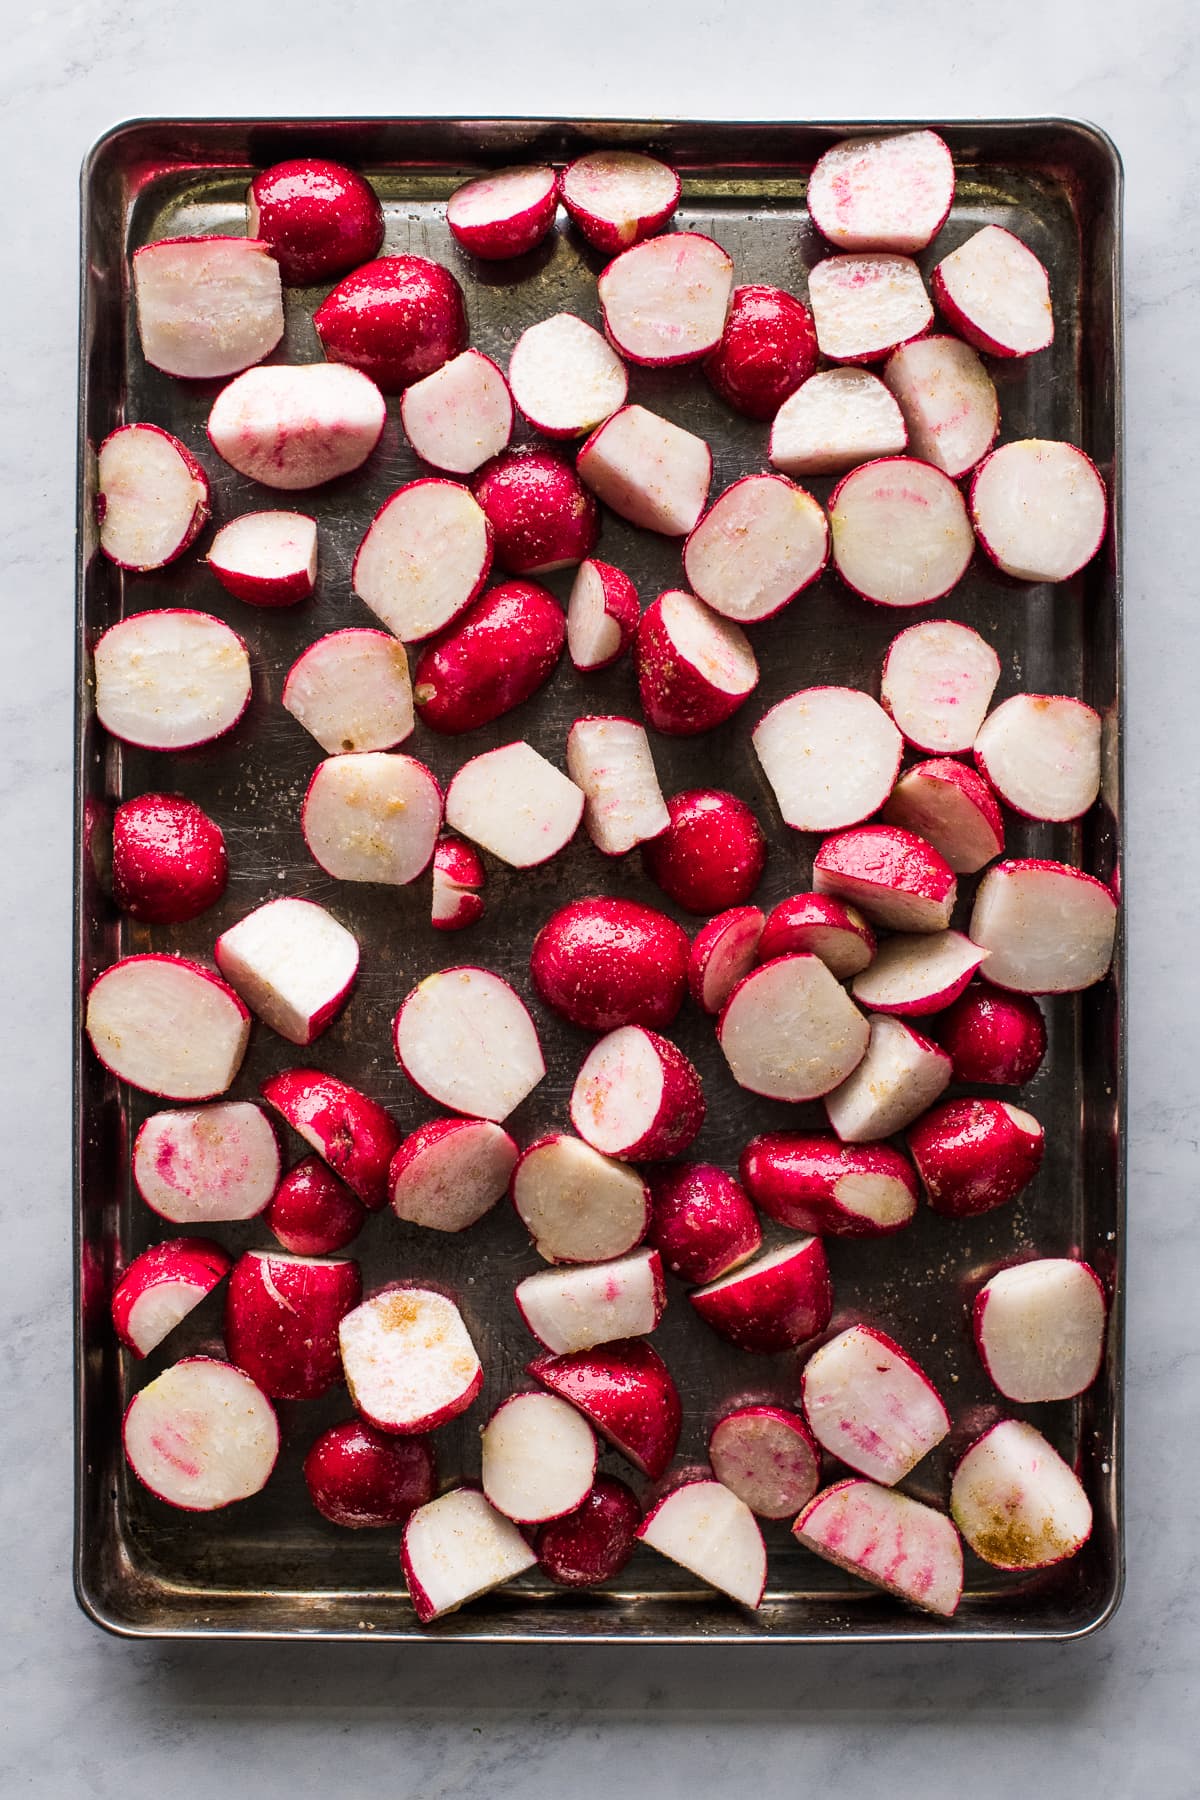 Radishes tossed with olive oil and spices on a sheet pan.